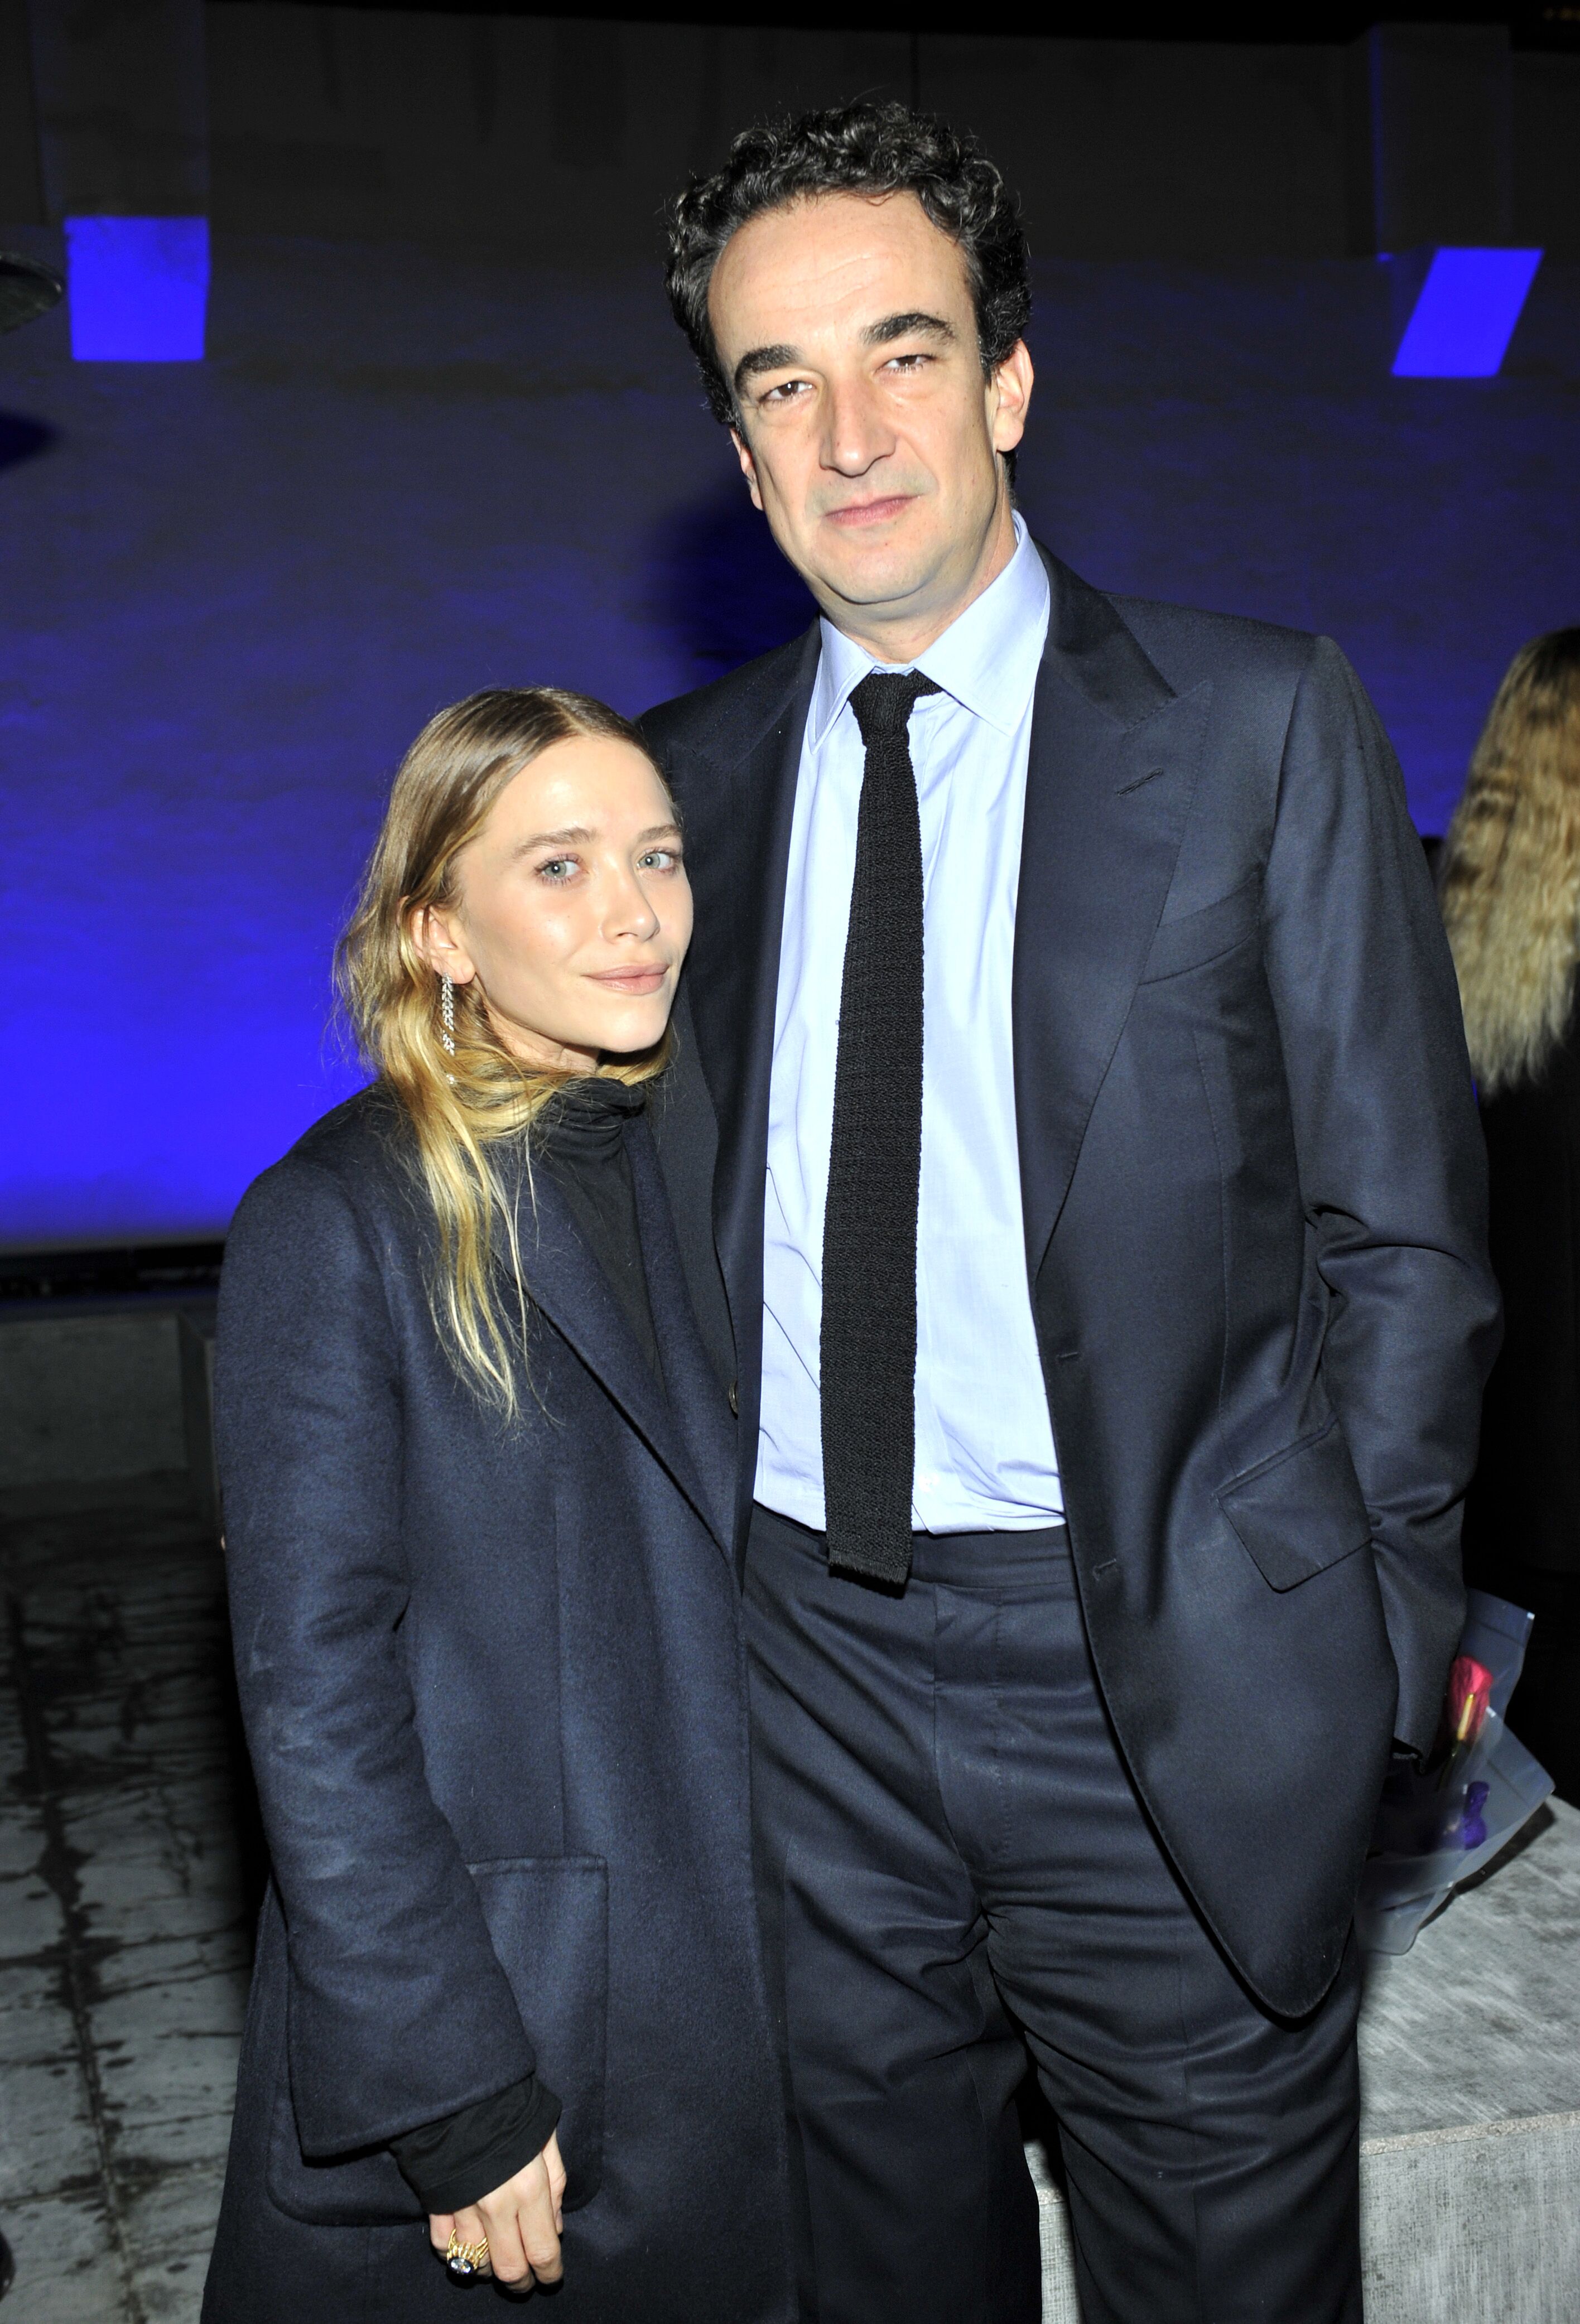 Mary-Kate Olsen and Olivier Sarkozy attend the launch of Just One Eye's Ulysses Tier 1 on December 5, 2014 in Los Angeles, California | Photo: Getty Images